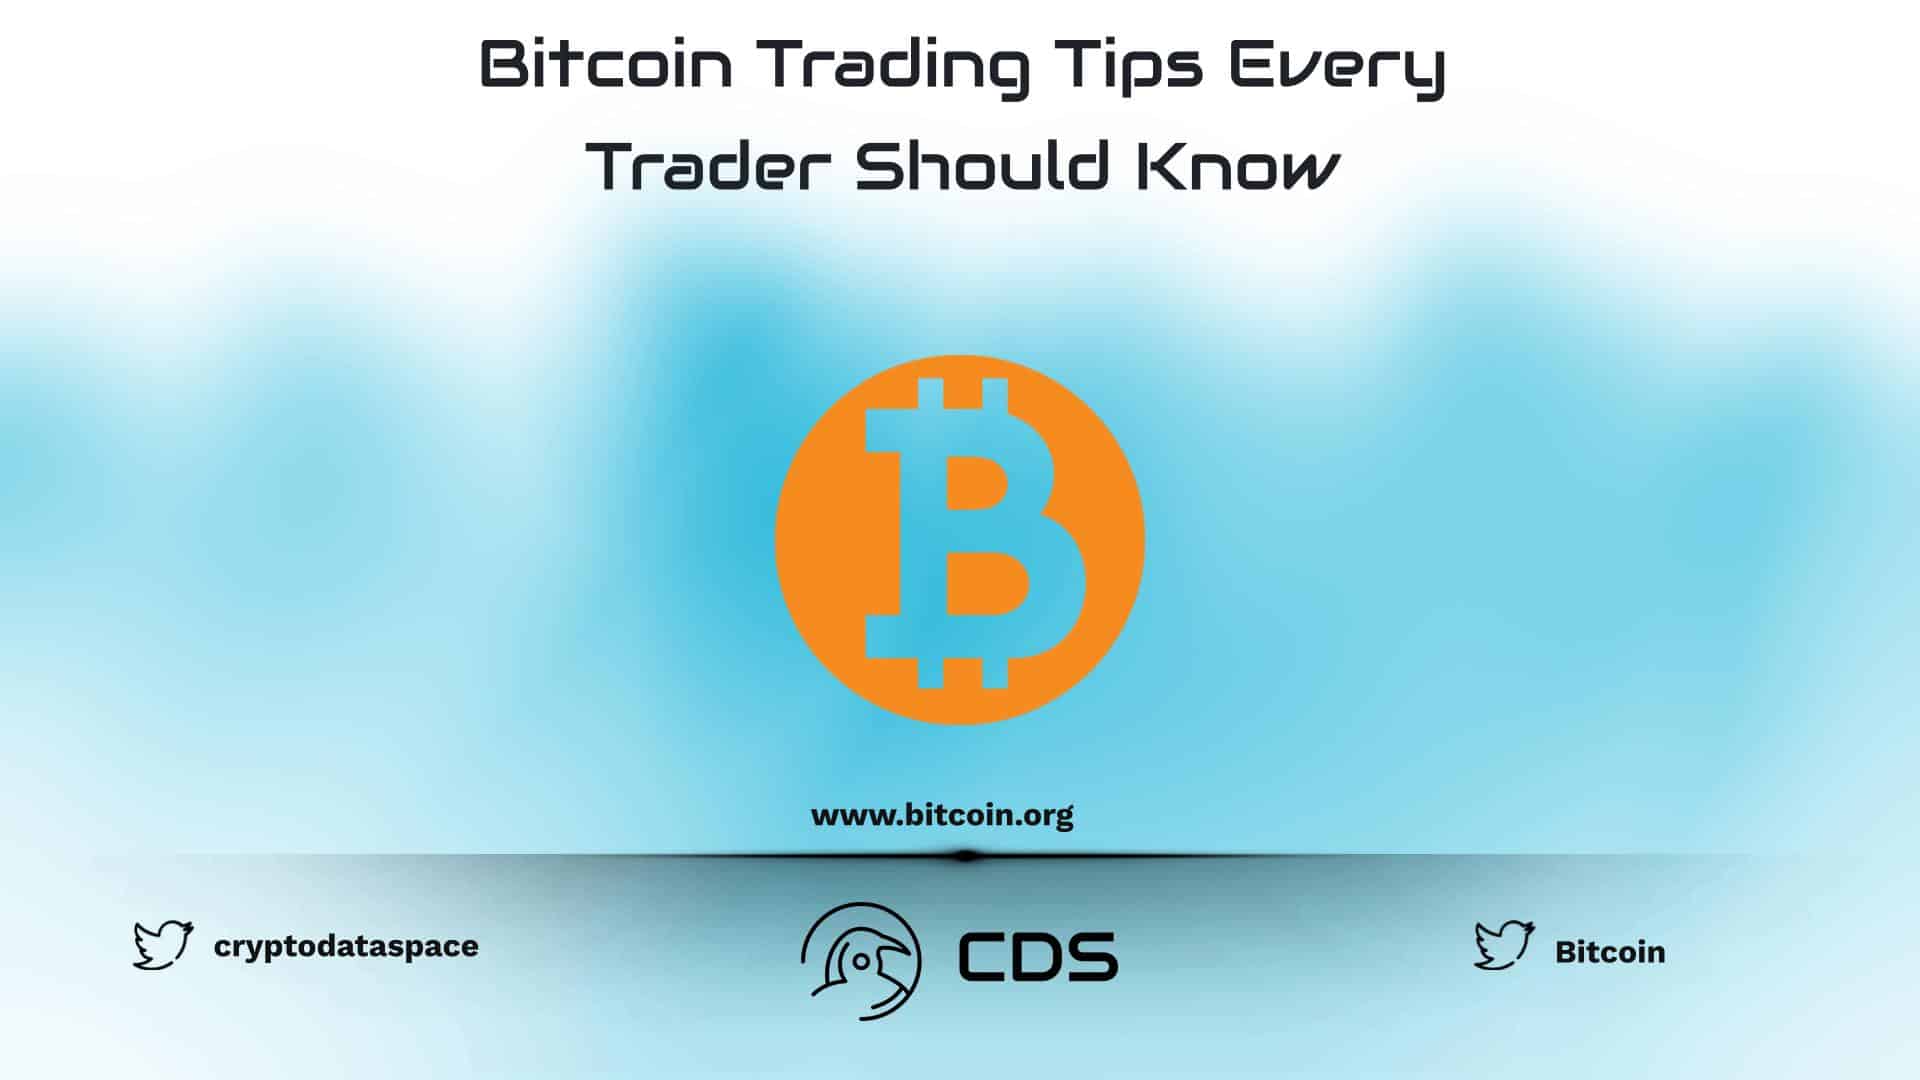 Bitcoin Trading Tips Every Trader Should Know